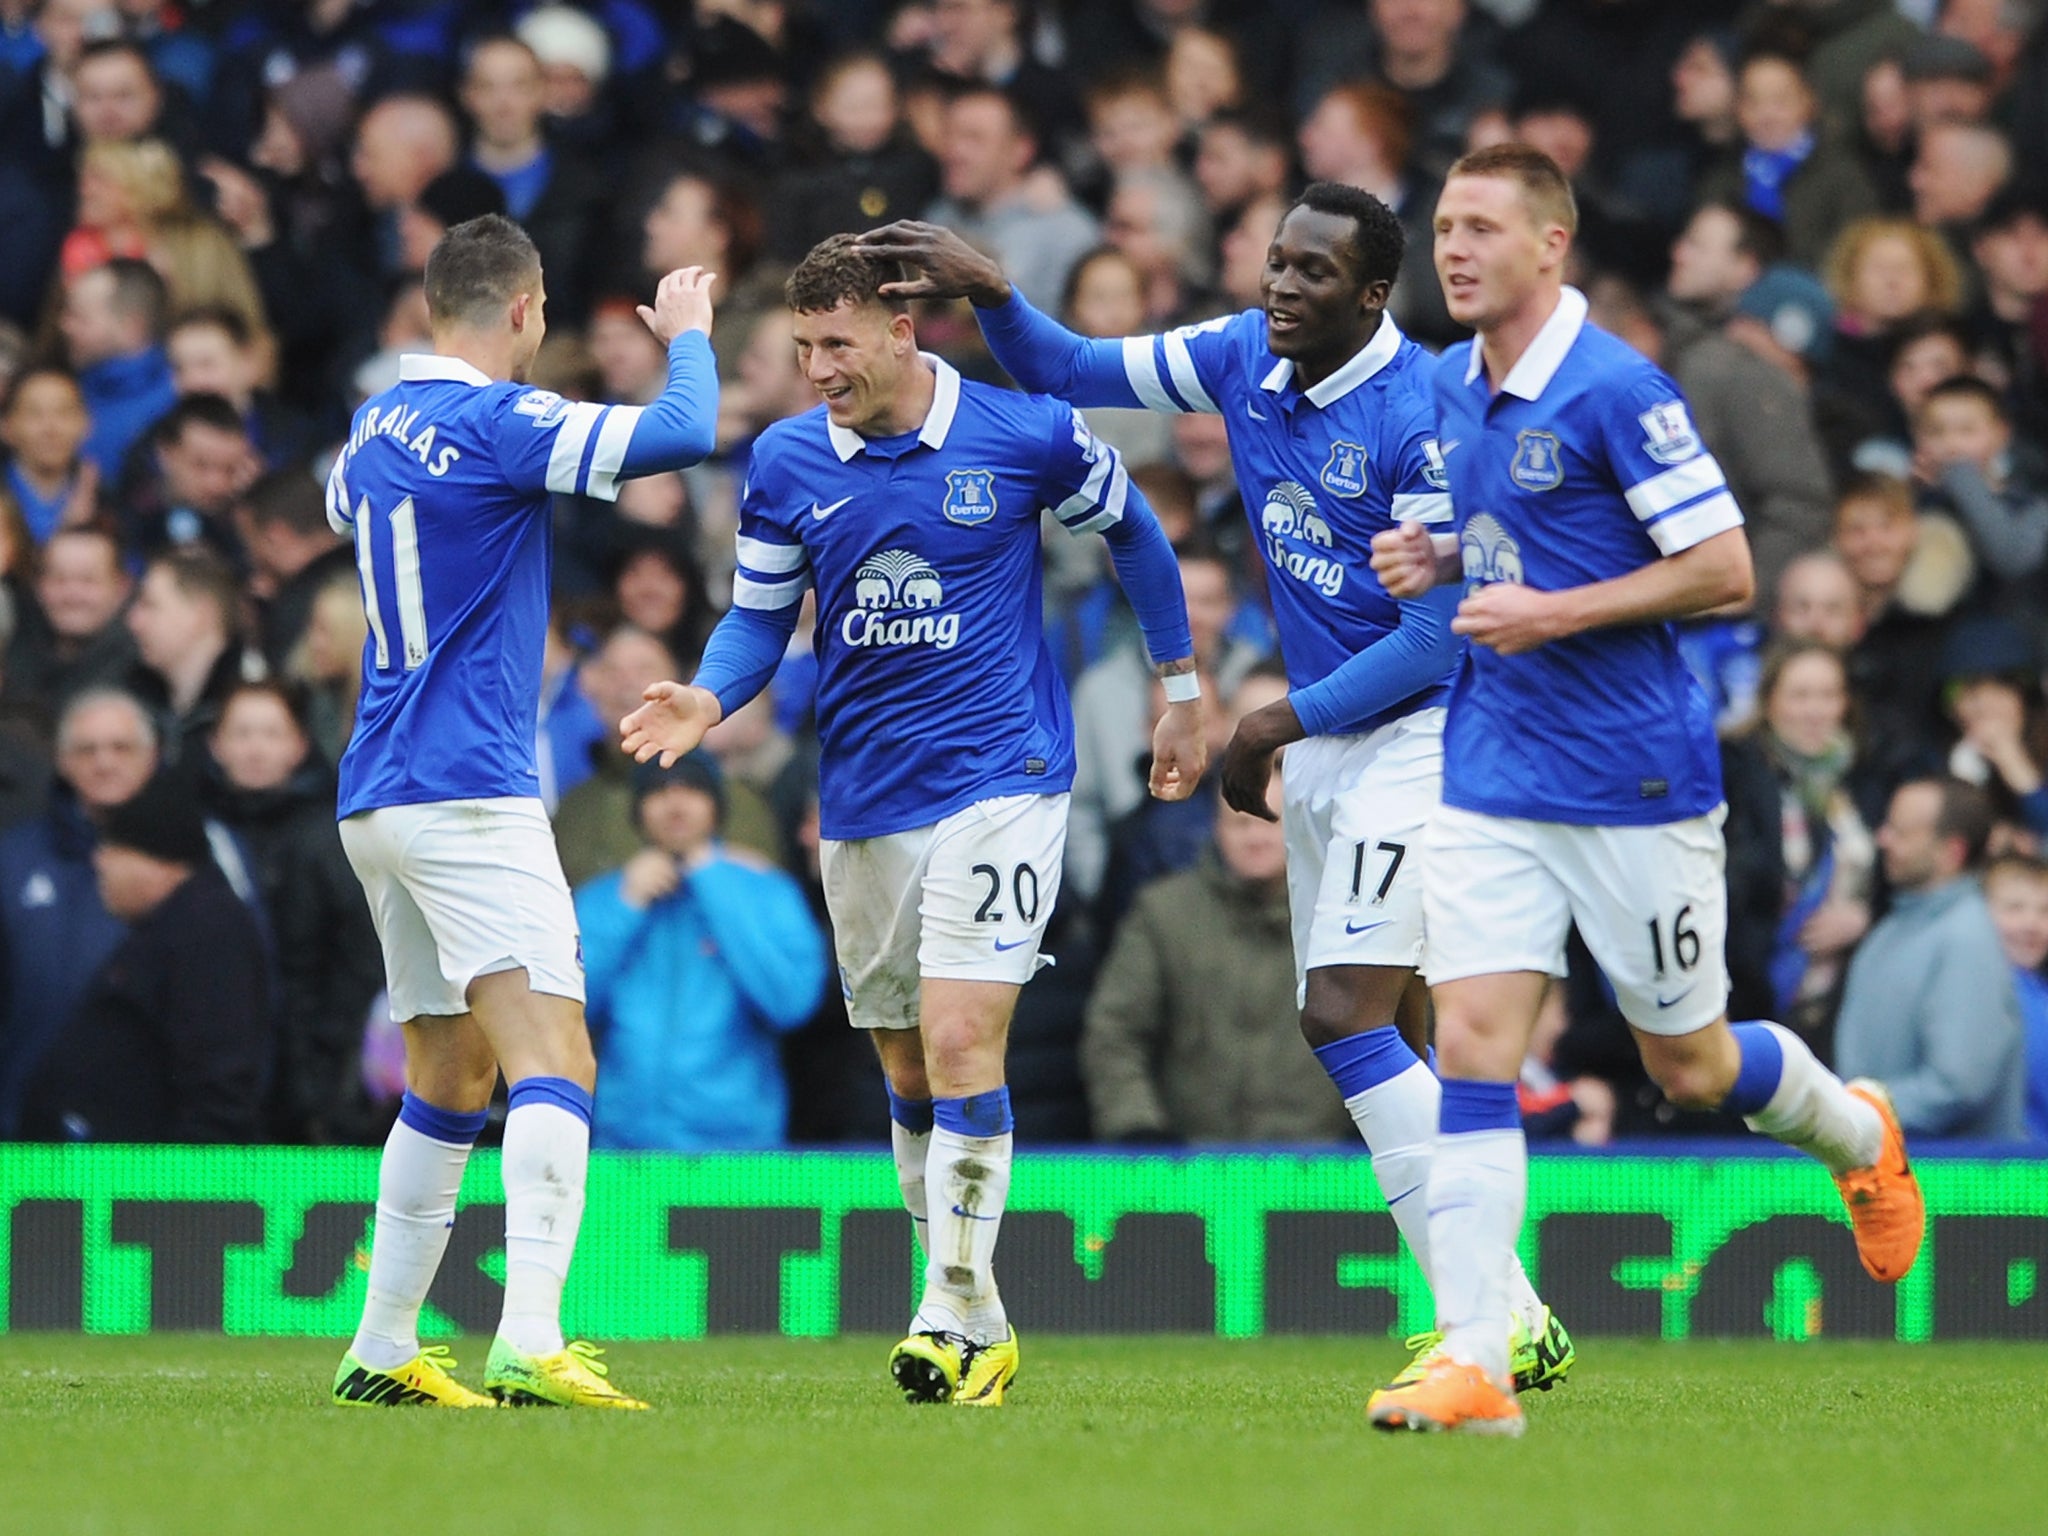 Ross Barkley celebrates with his Everton team-mates after scoring the winning goal against Swansea